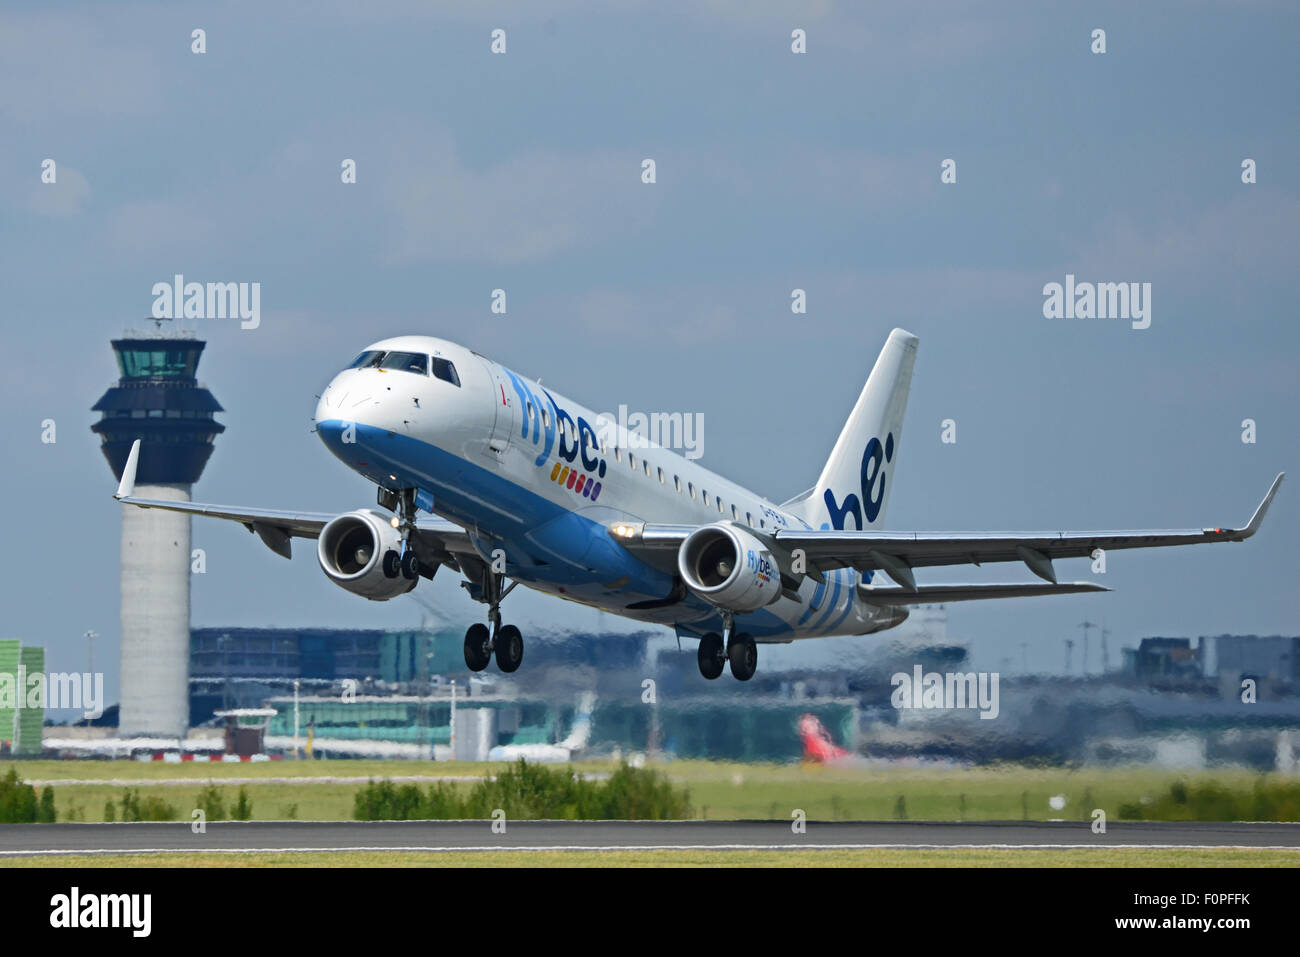 Flybe airliner jet Manchester Airport England uk departure Stock Photo